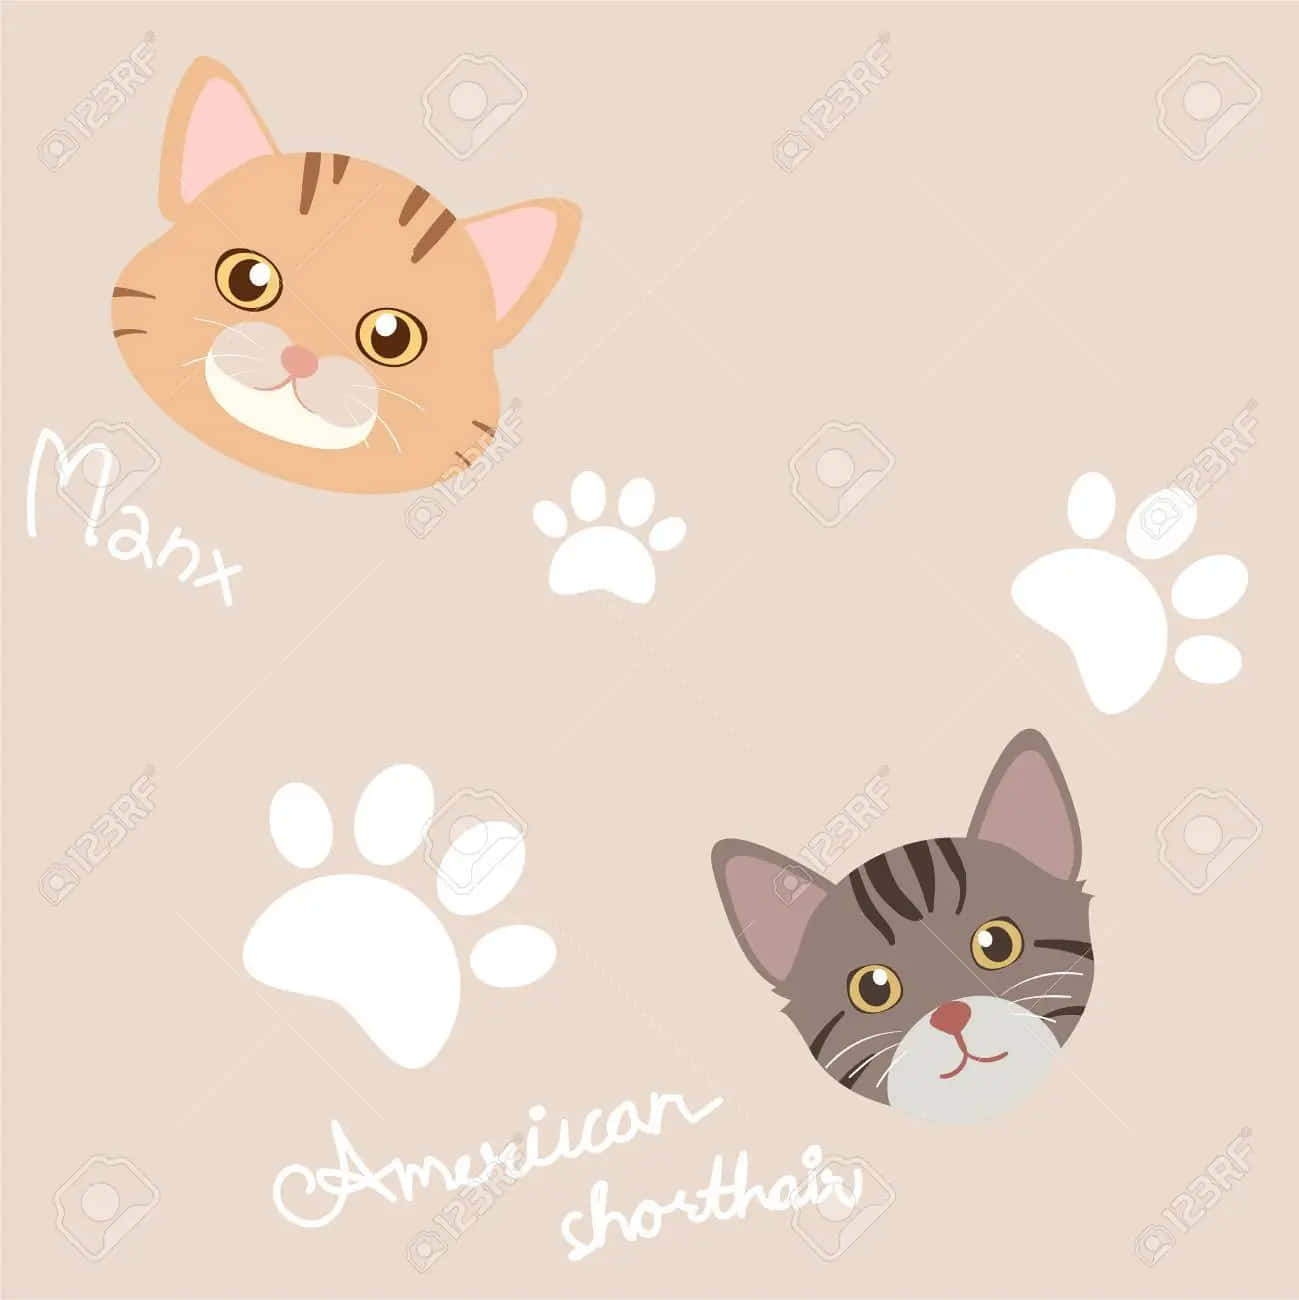 Two Cats With Paw Prints On A Beige Background Wallpaper